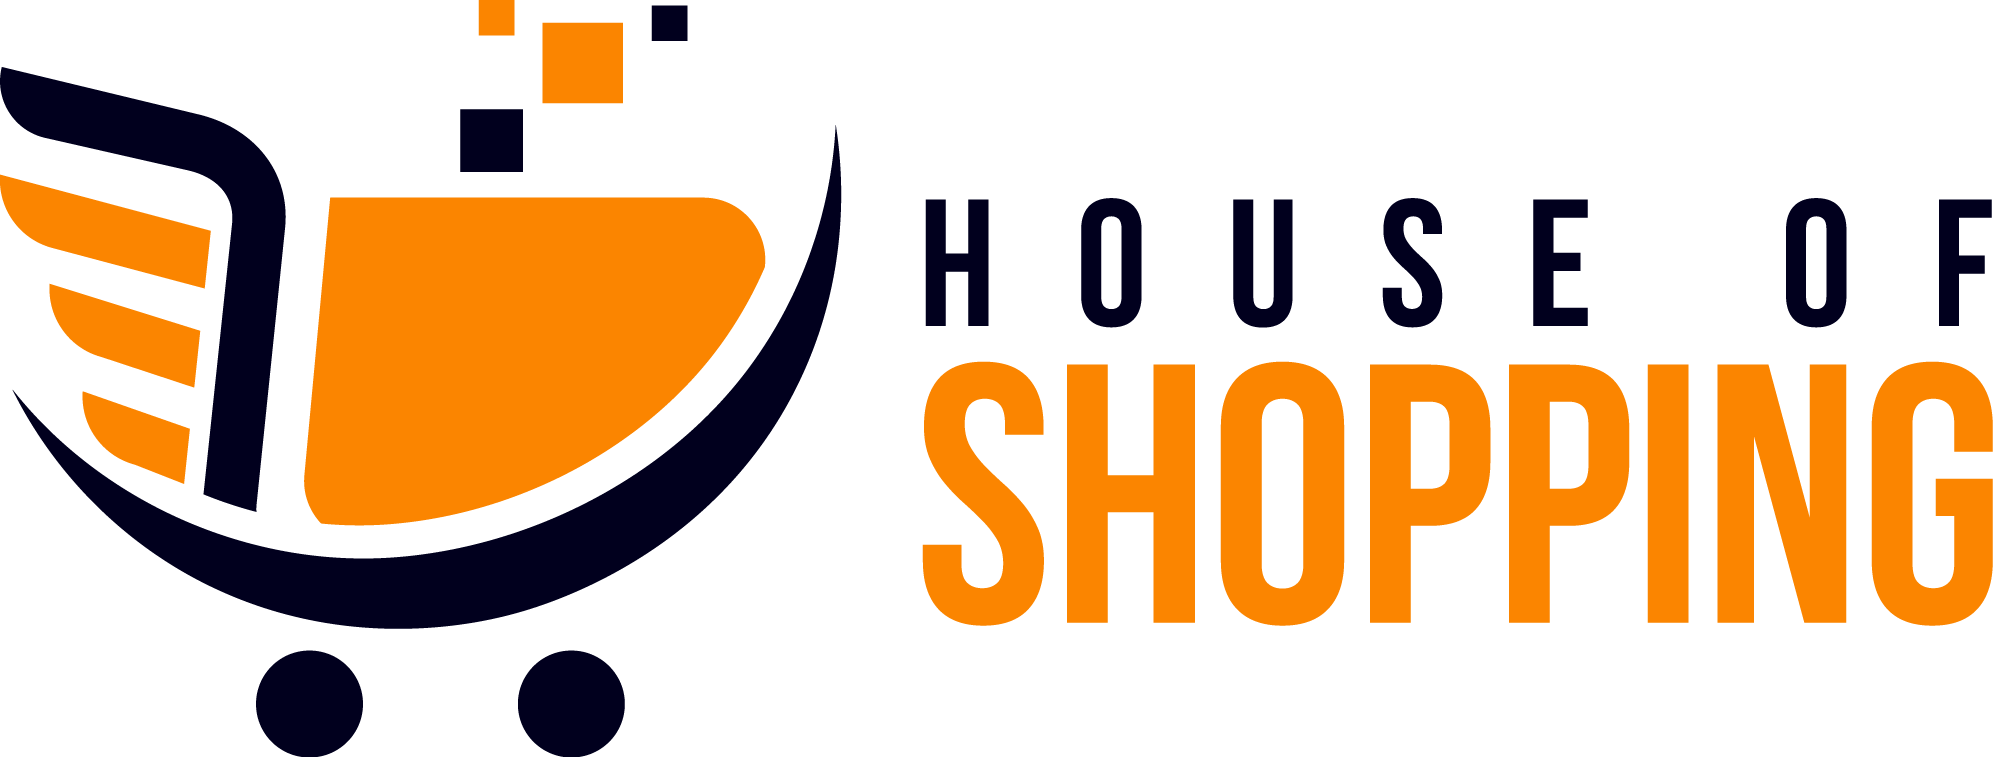 House Of Shopping 